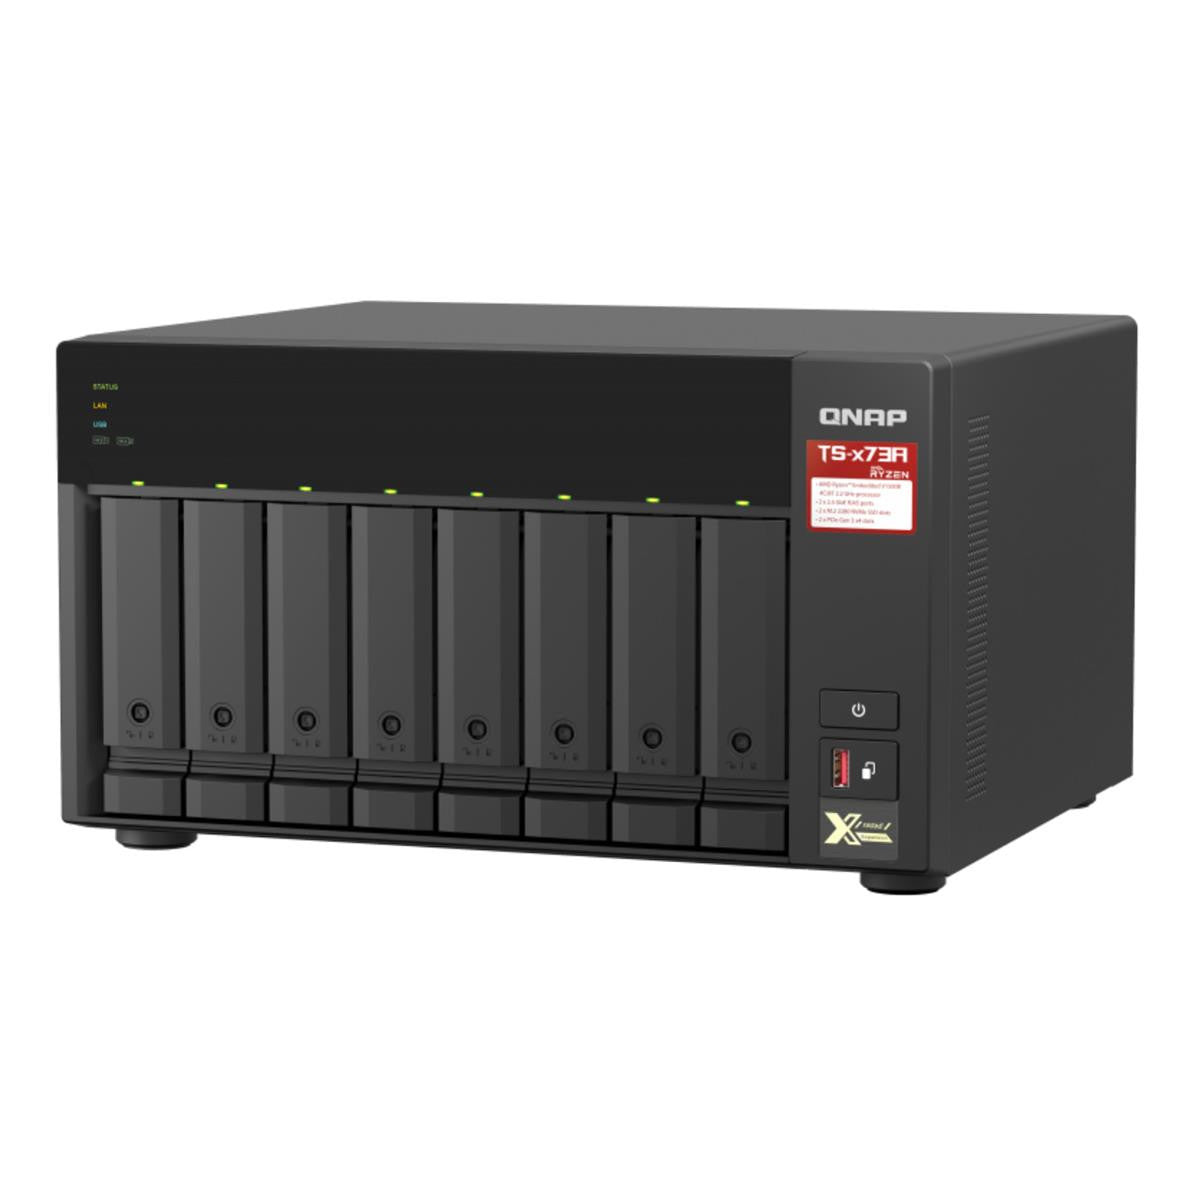 QNAP TS-873A 8-BAY NAS with 64GB DDR4 RAM and 16TB (8x2TB) Western Digital RED PLUS Drives Fully Assembled and Tested